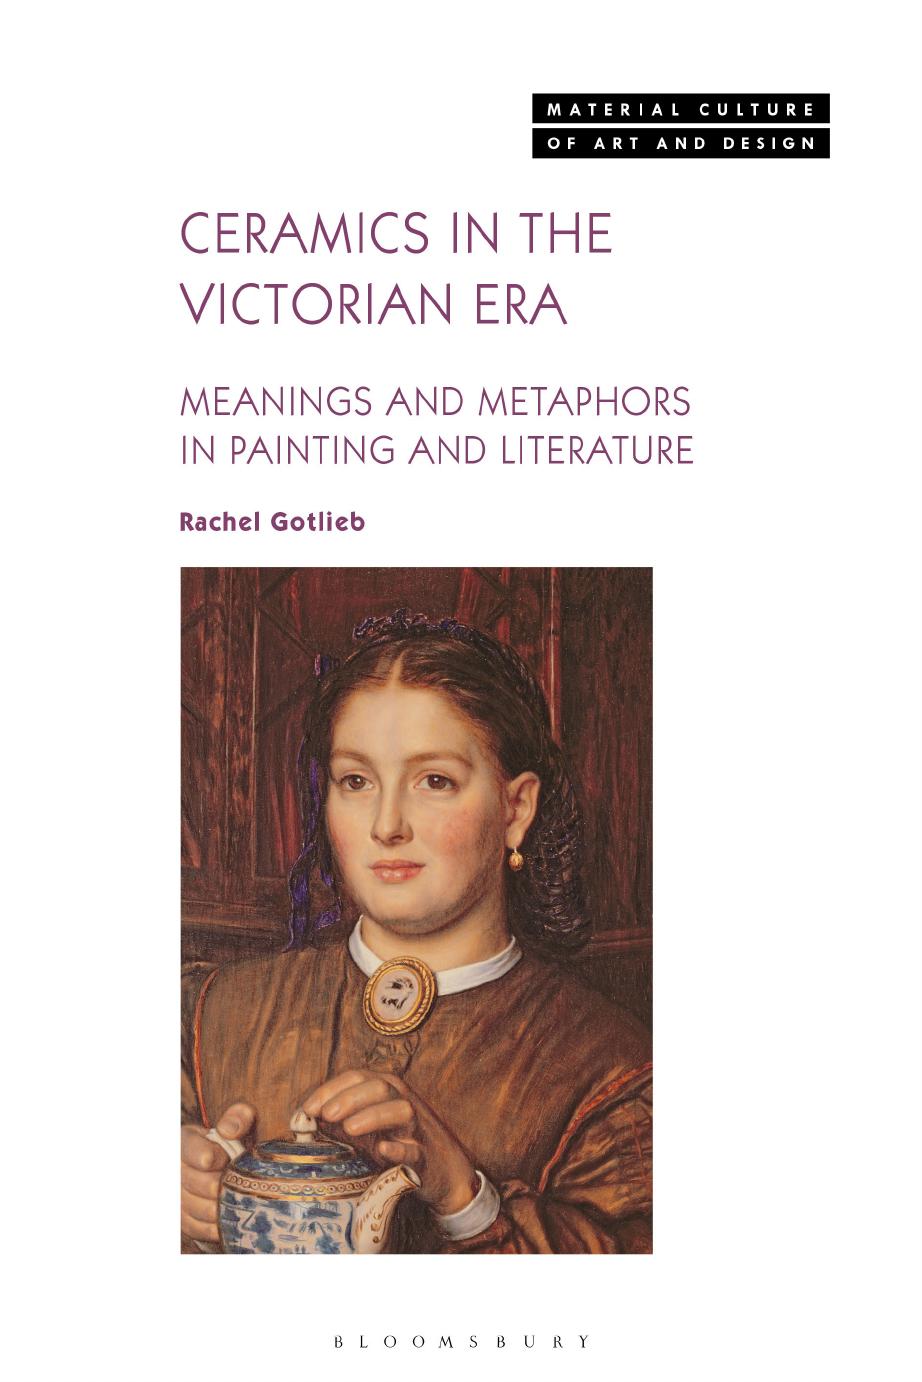 Ceramics in the Victorian Era: Meanings and Metaphors: Meanings and Metaphors in Painting and Literature by Rachel Gotlieb